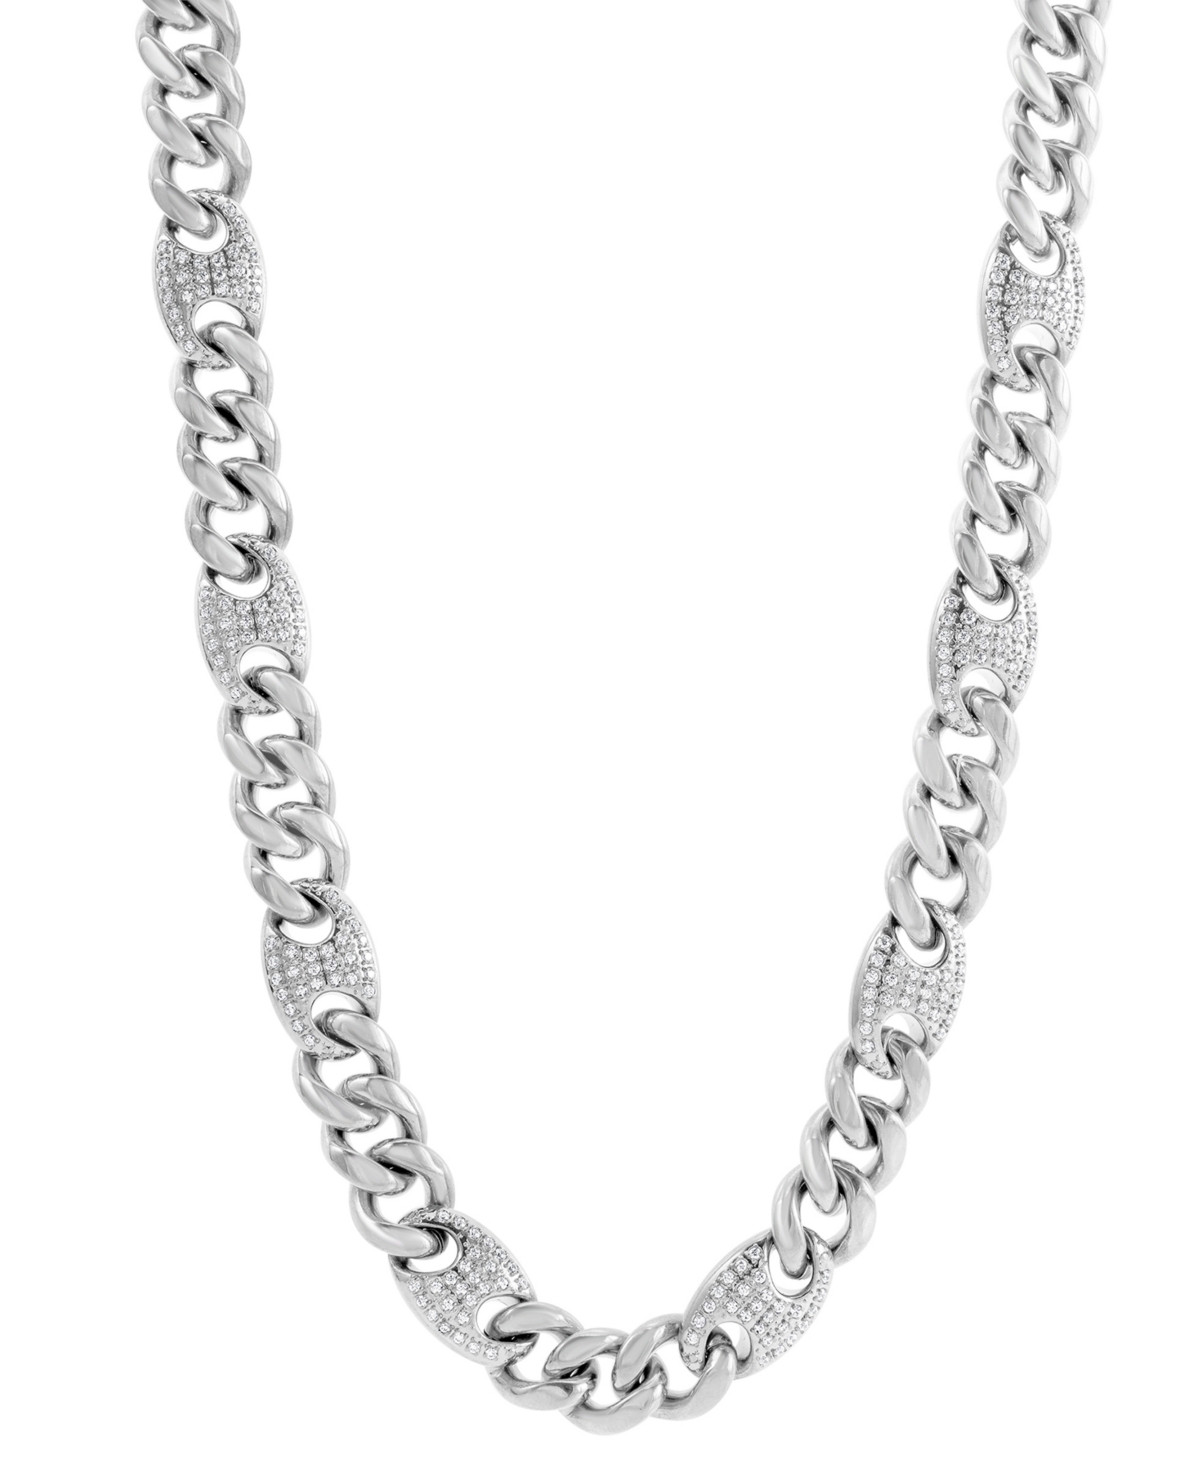 Men's Cubic Zirconia Mariner & Curb Link 24" Chain Necklace - Gold-Tone